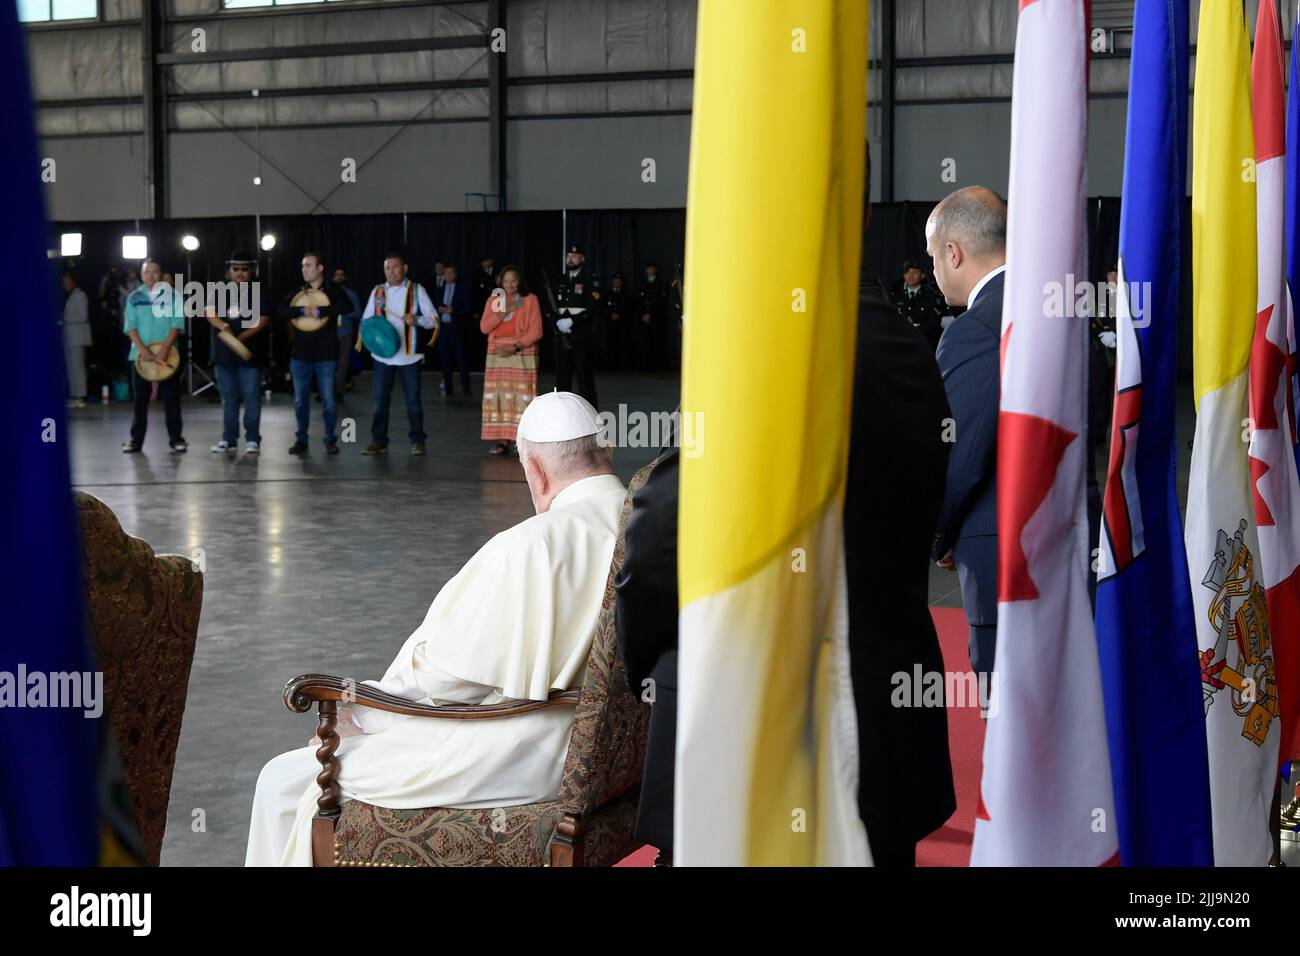 Vatican, Vatican. 24th July, 2022. Canada, Alberta, 2022/07/24 Pope Francis meets members of an indigenous tribe during his welcoming ceremony at Edmonton International Airport in Alberta, western Canada Photograph by Vatican Mediia/Catholic Press Photo. RESTRICTED TO EDITORIAL USE - NO MARKETING - NO ADVERTISING CAMPAIGNS. Credit: Independent Photo Agency/Alamy Live News Stock Photo